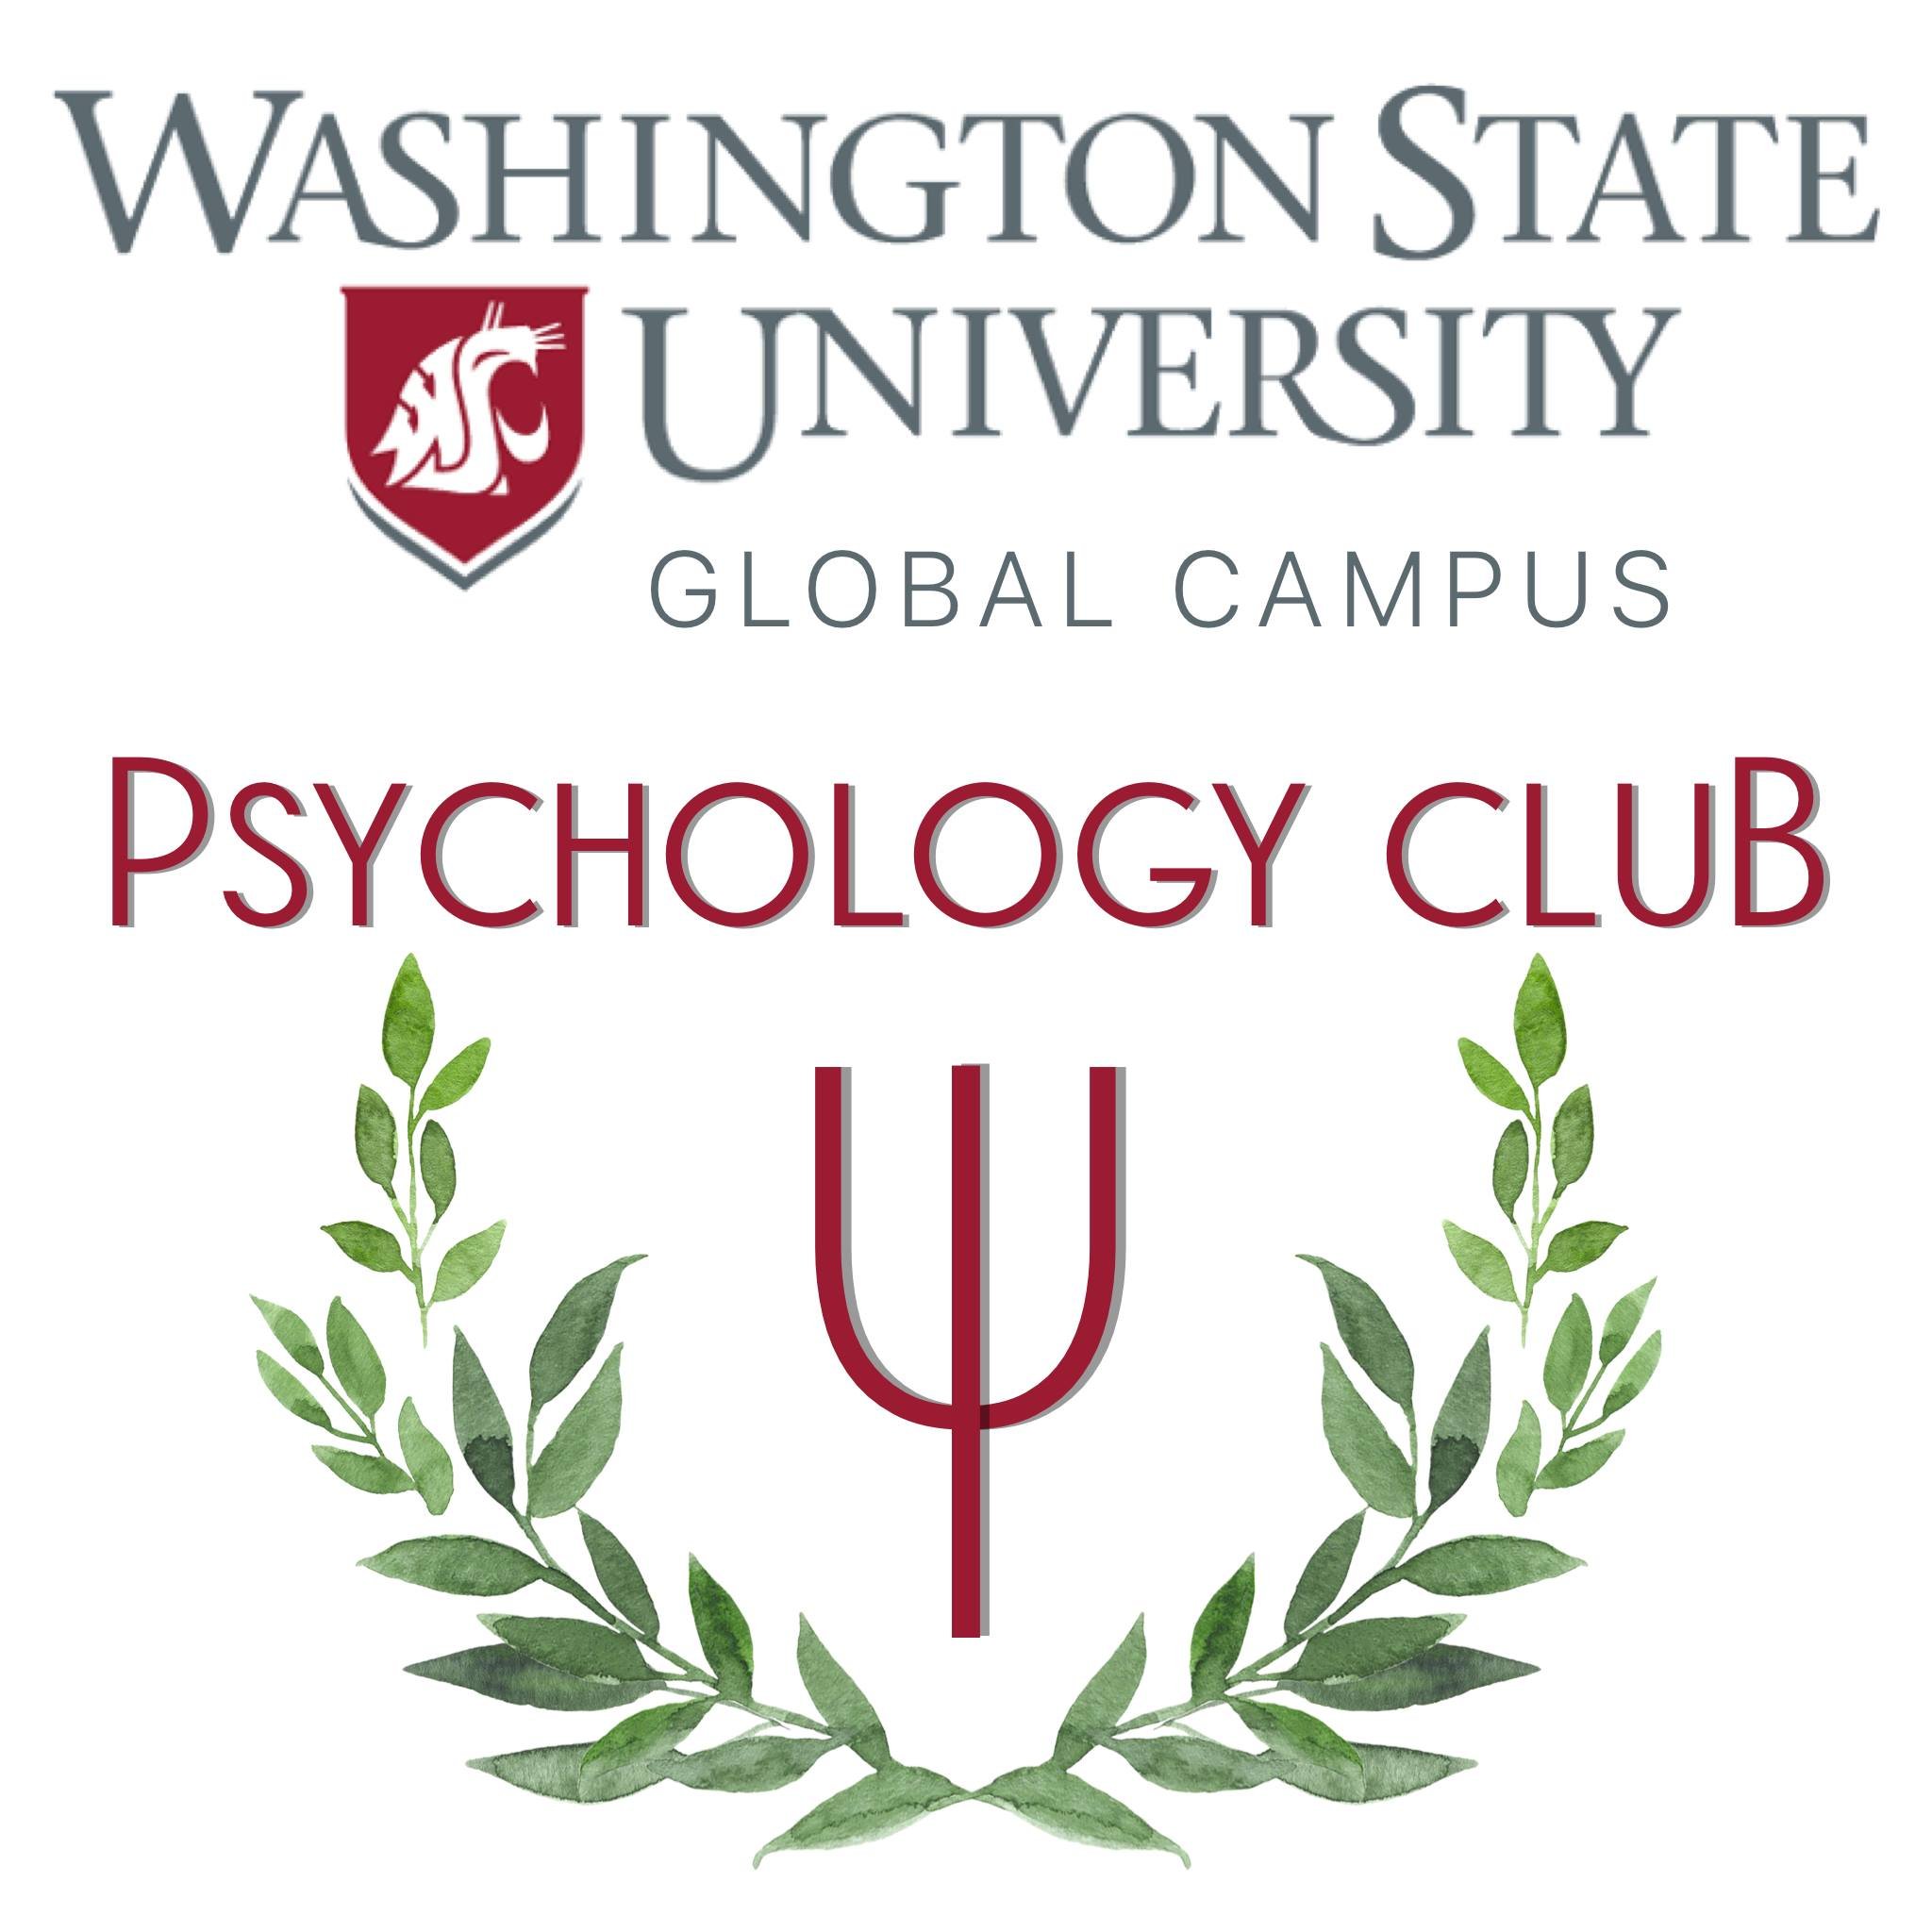 WSUs Global Campus Psych Club is open to students interested in Psychology who attend WSUs Global Campus